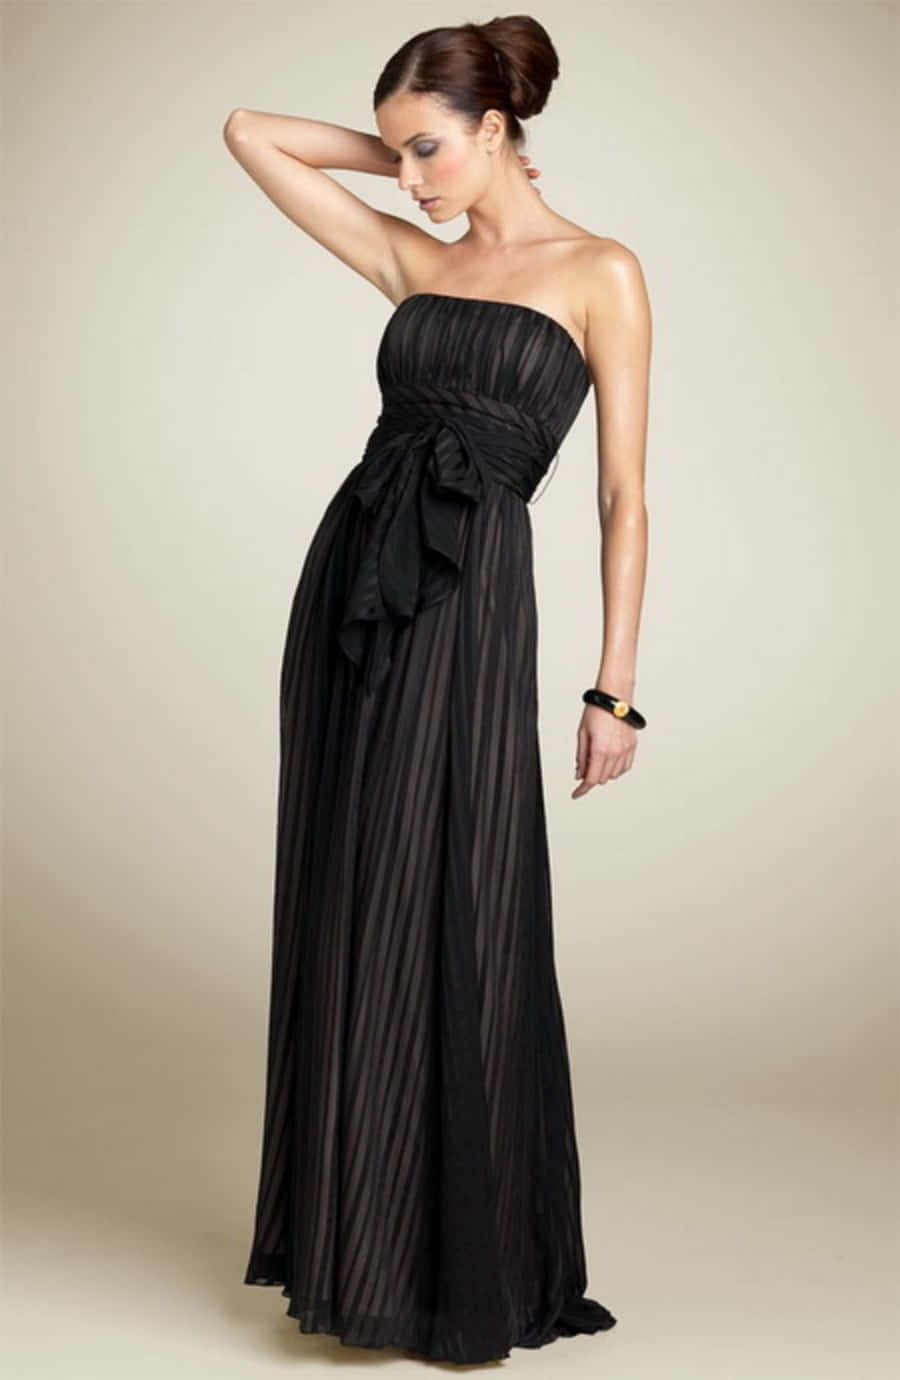 Classy and Chic Black Tie Dresses for Any Special Occassion Wallpaper